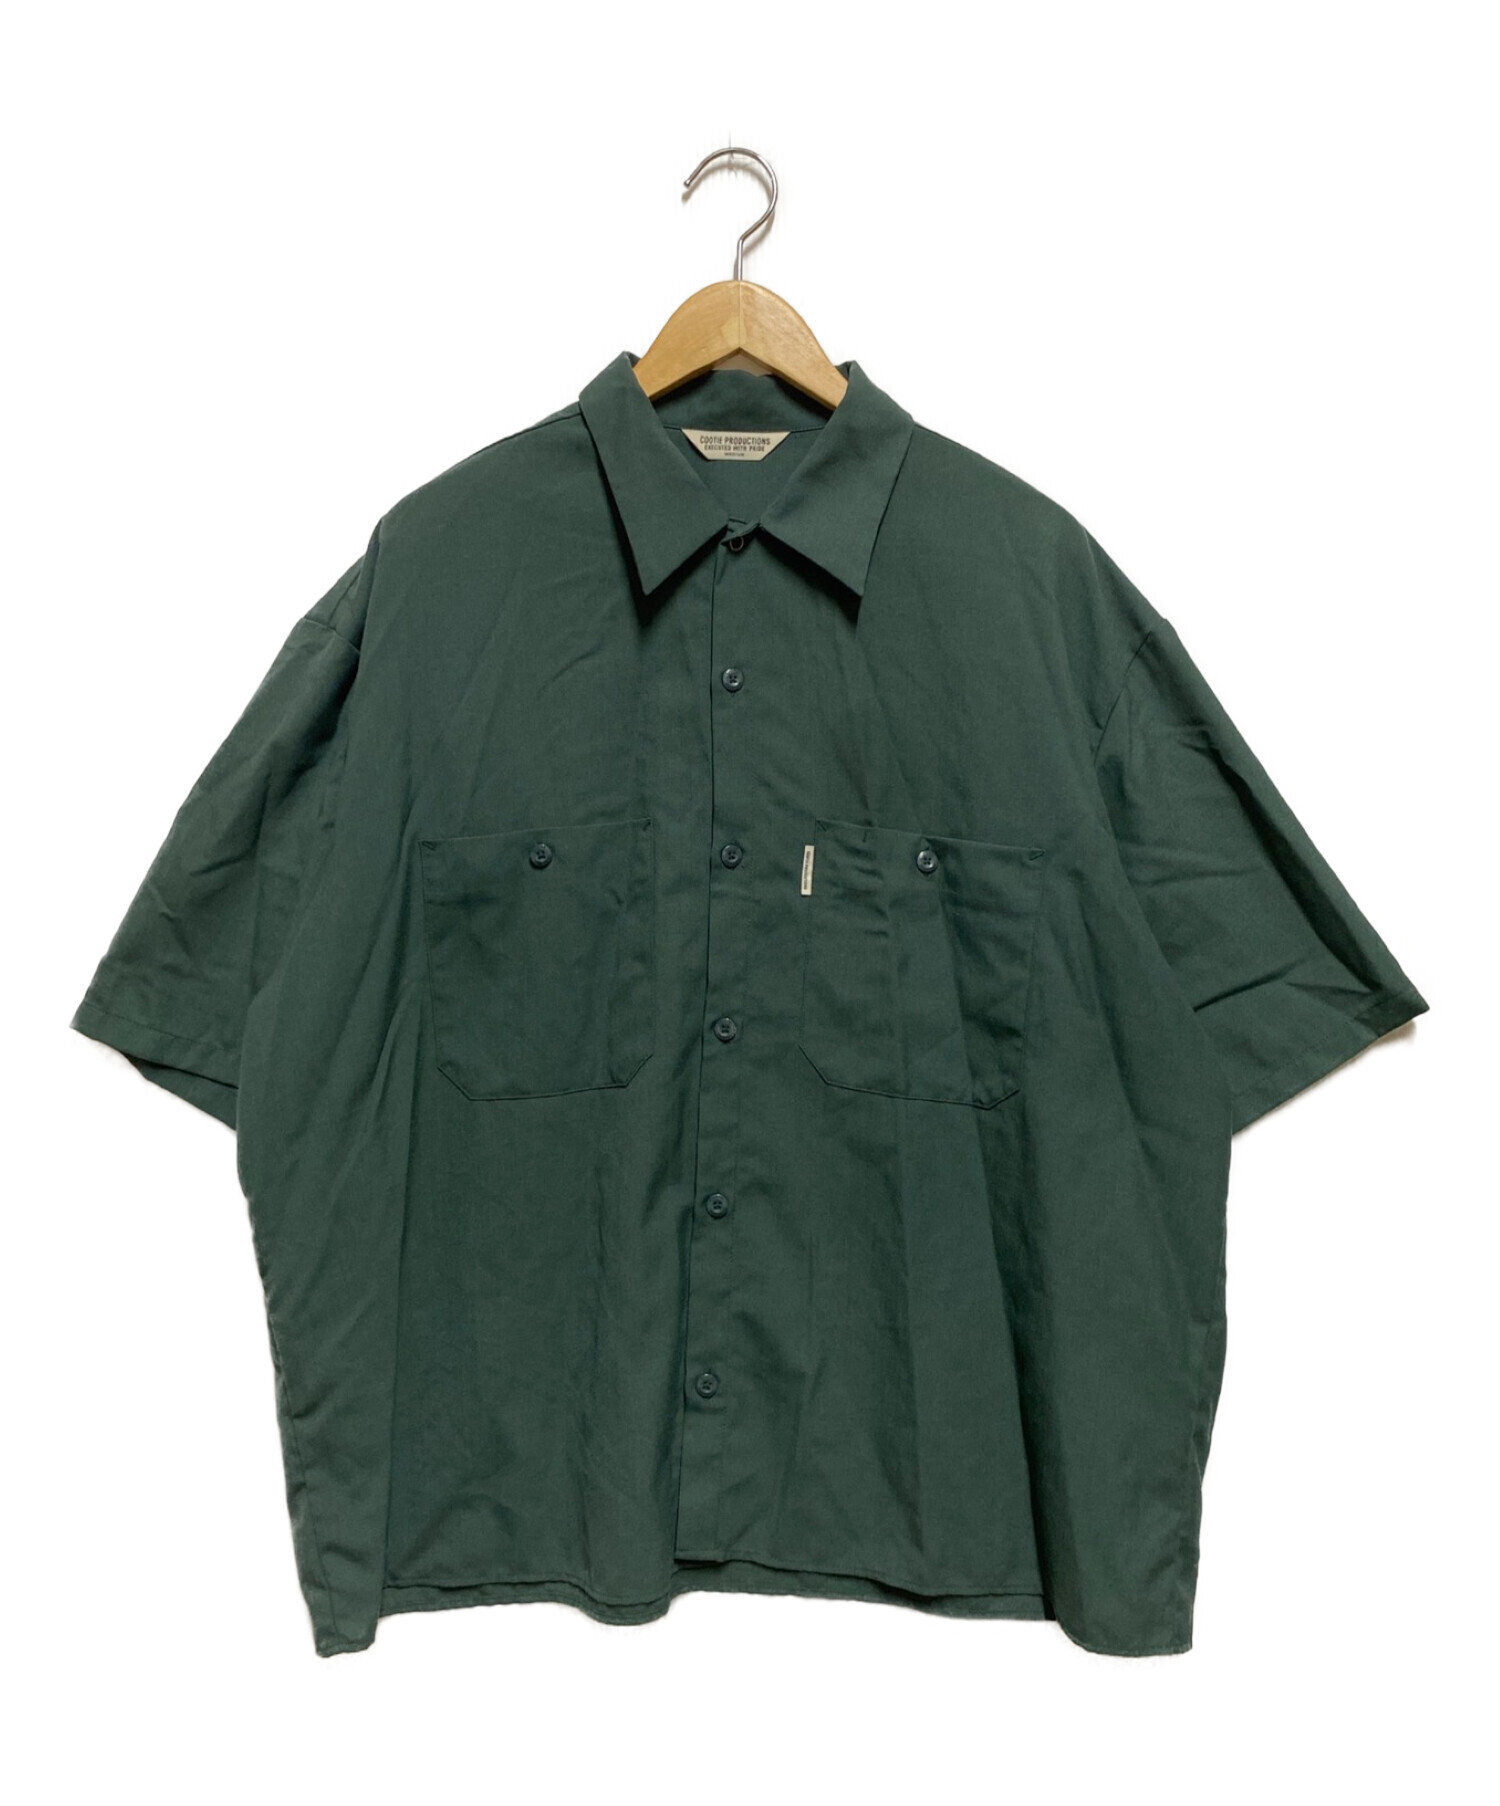 COOTIE PRODUCTIONS (クーティープロダクツ) T/W Work S/S Shirt グリーン サイズ:М